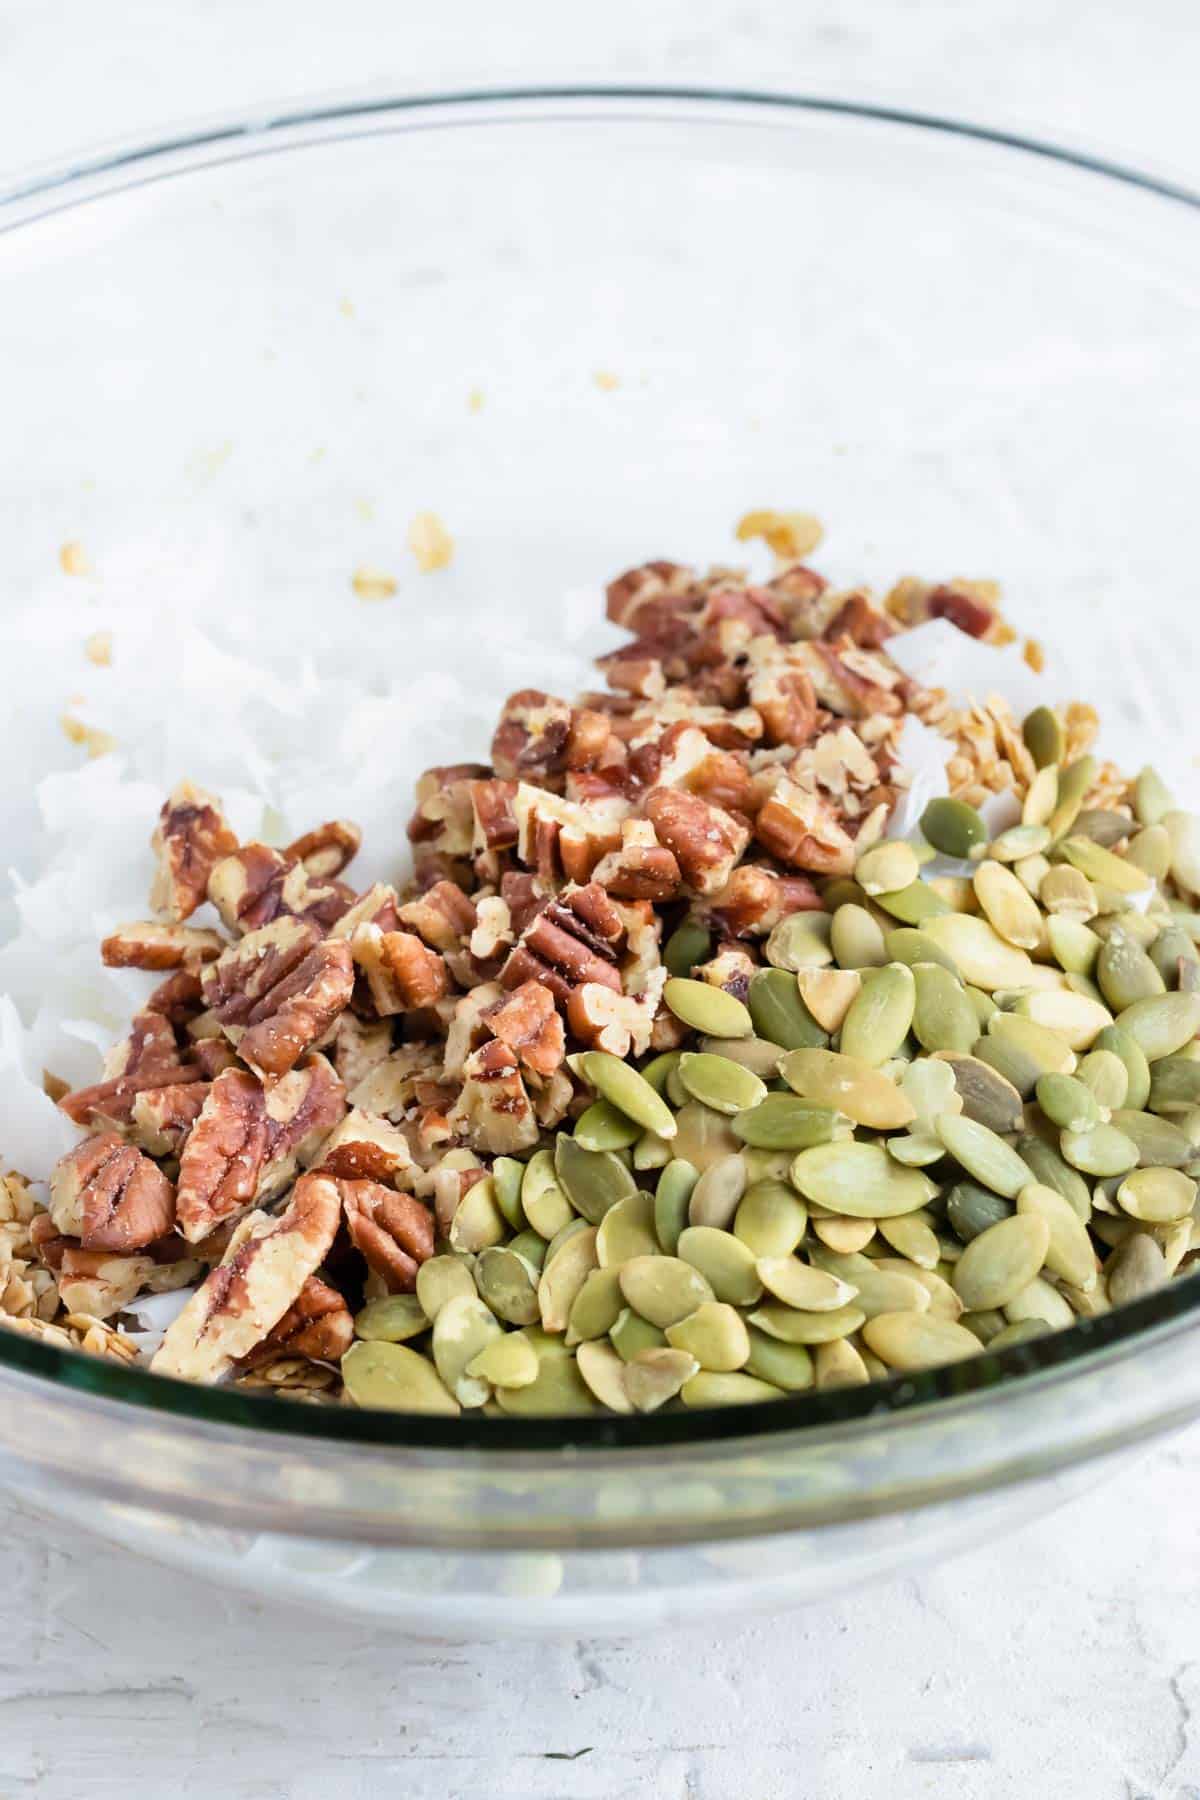 Pecans, coconut, and pumpkin seeds are added.